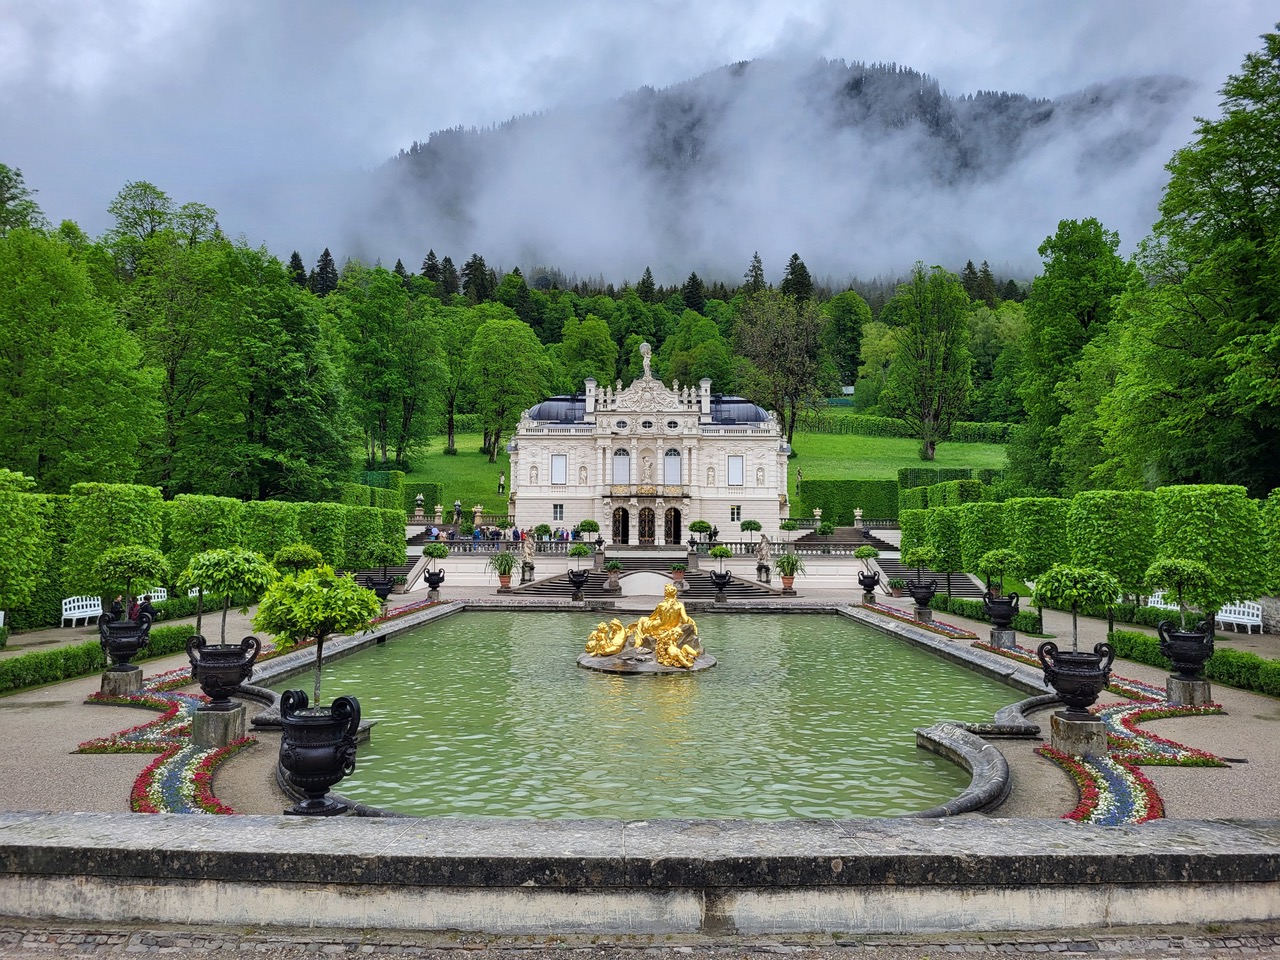 Linderhof palace exterior looking over the pool in the gardens